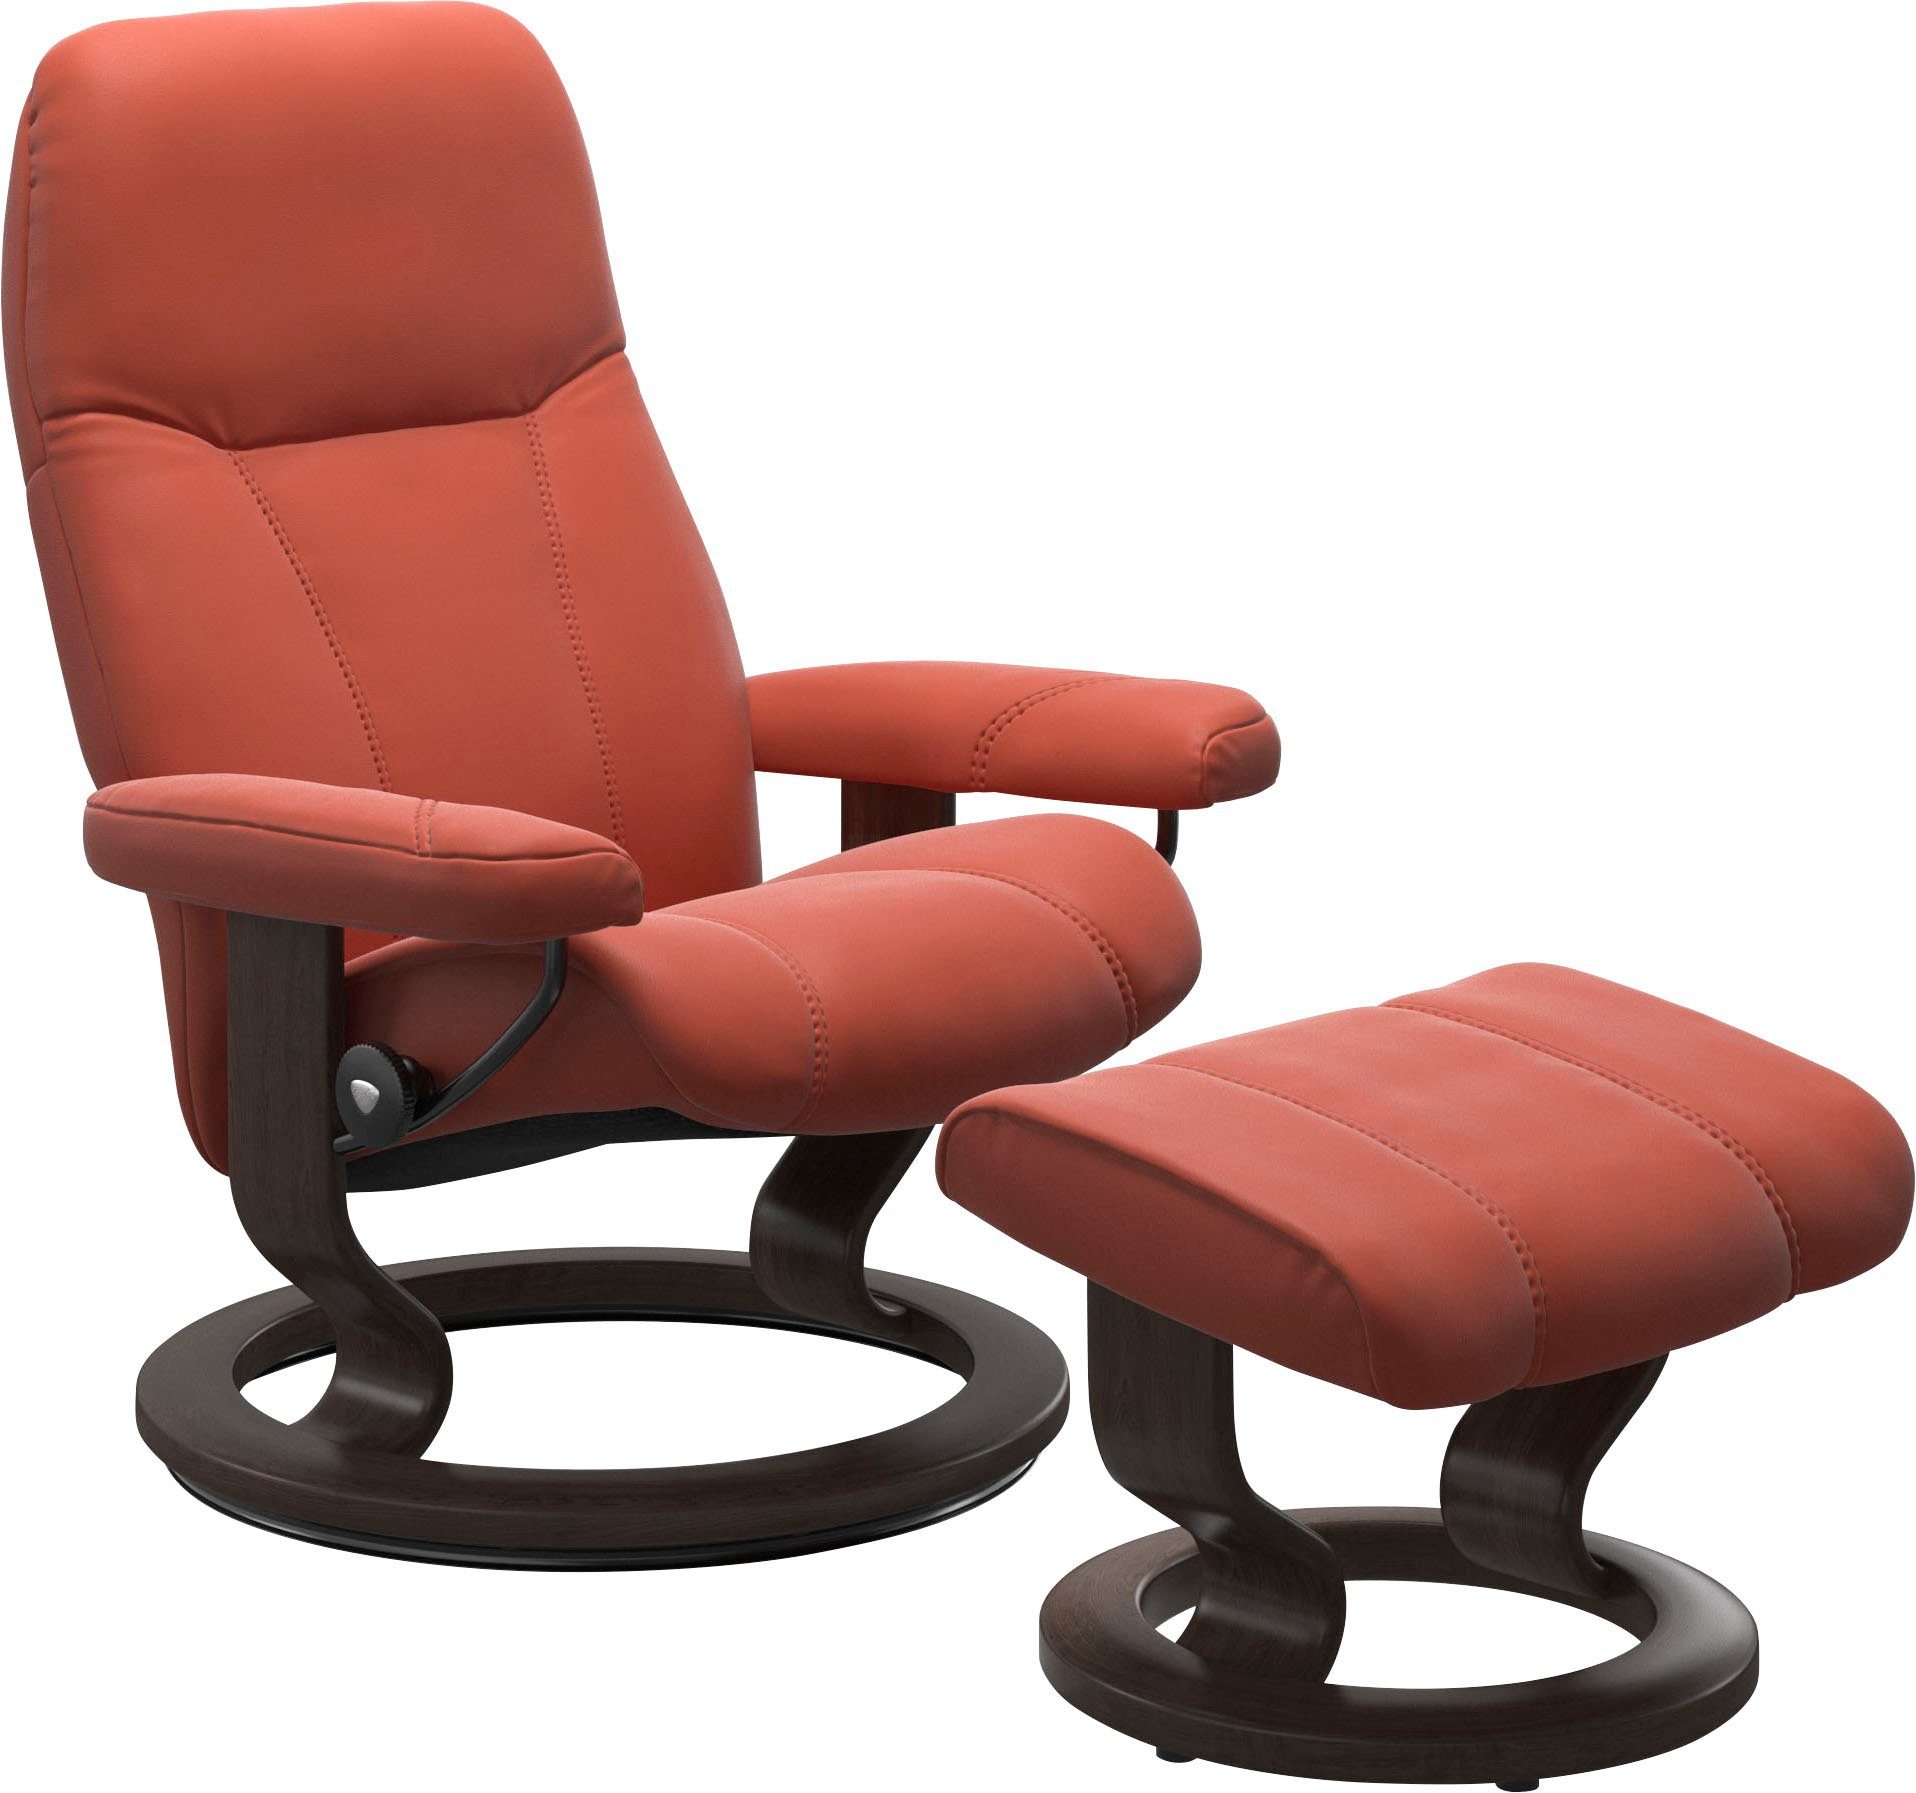 Stressless® Relaxsessel Consul, mit Classic Gestell Wenge Base, S, Größe